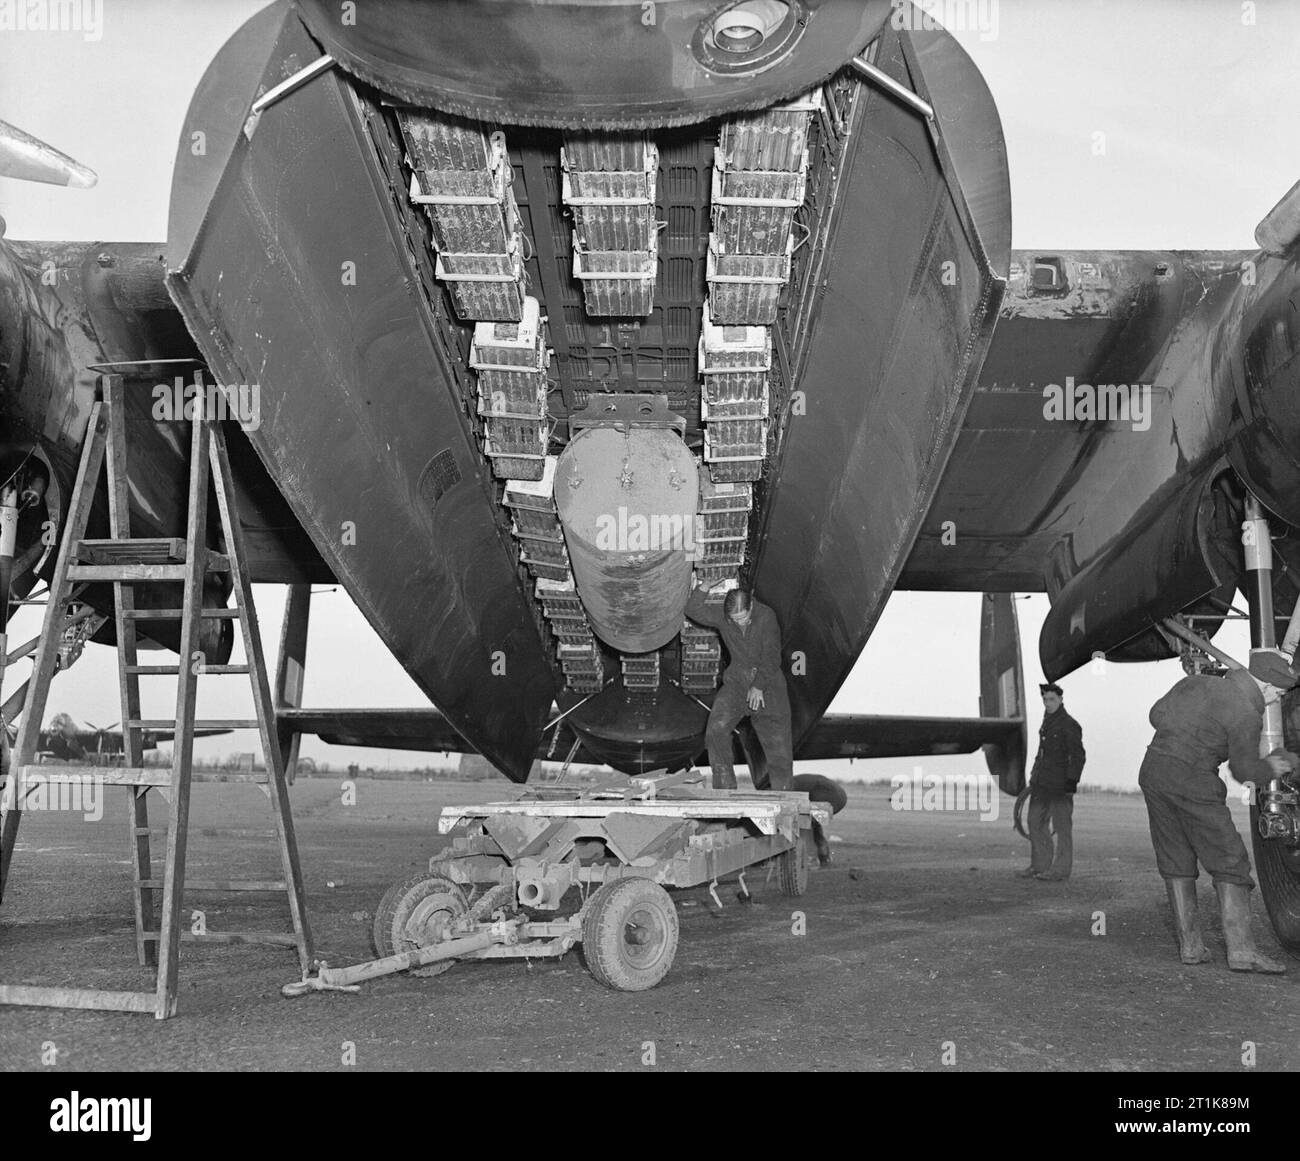 Royal Air Force Bomber Command, 1942-1945. The bomb load most commonly used for area bombing raids (Bomber Command executive codeword 'Usual') in the bomb bay of an Avro Lancaster of No. 57 Squadron RAF at Scampton Lincolnshire. 'Usual' consisted of a 4,000 impact-fused HC bomb ('cookie'), and 12 Small Bomb Containers (SBCs) each loaded with incendiaries, in this case, 236 x 4-lb incendiary sticks. Stock Photo